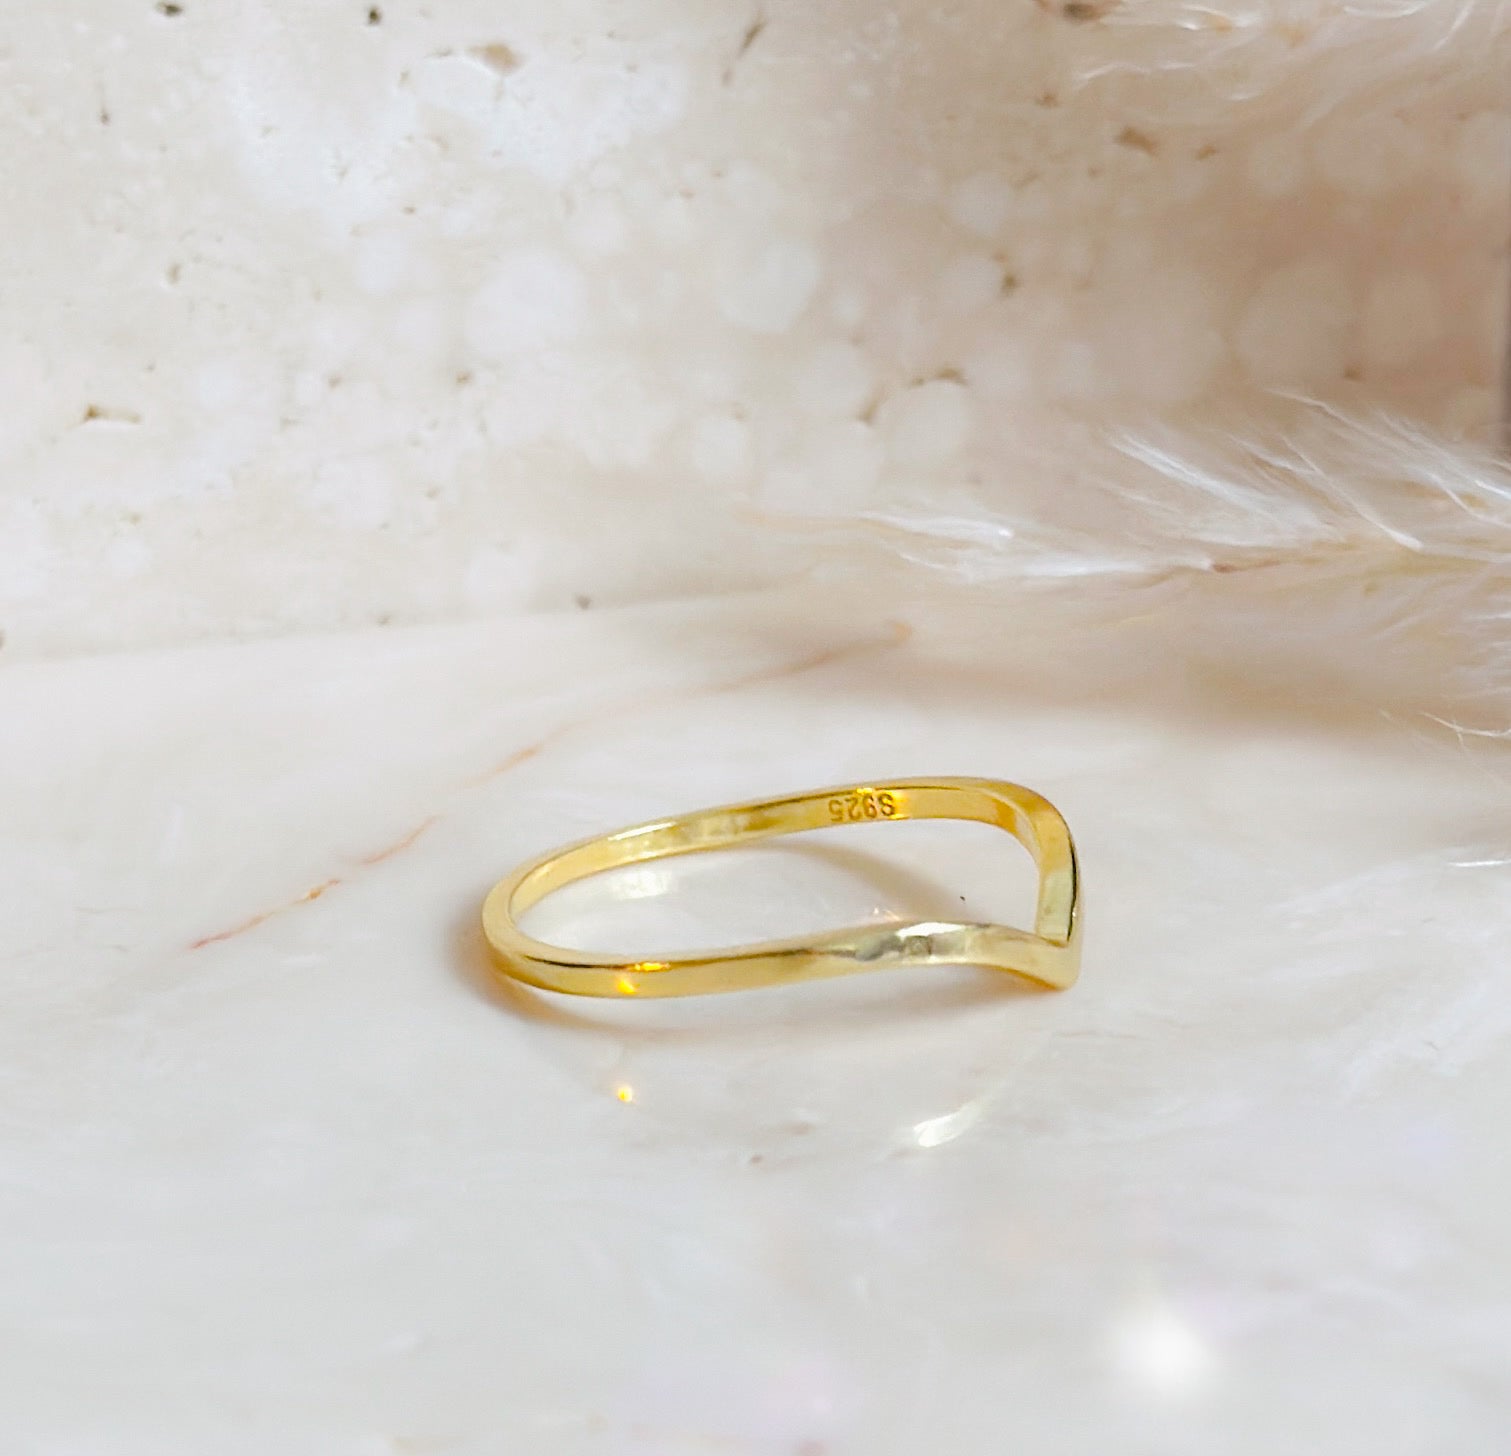 This Sterling Silver 18k Gold Plated Chevron ring